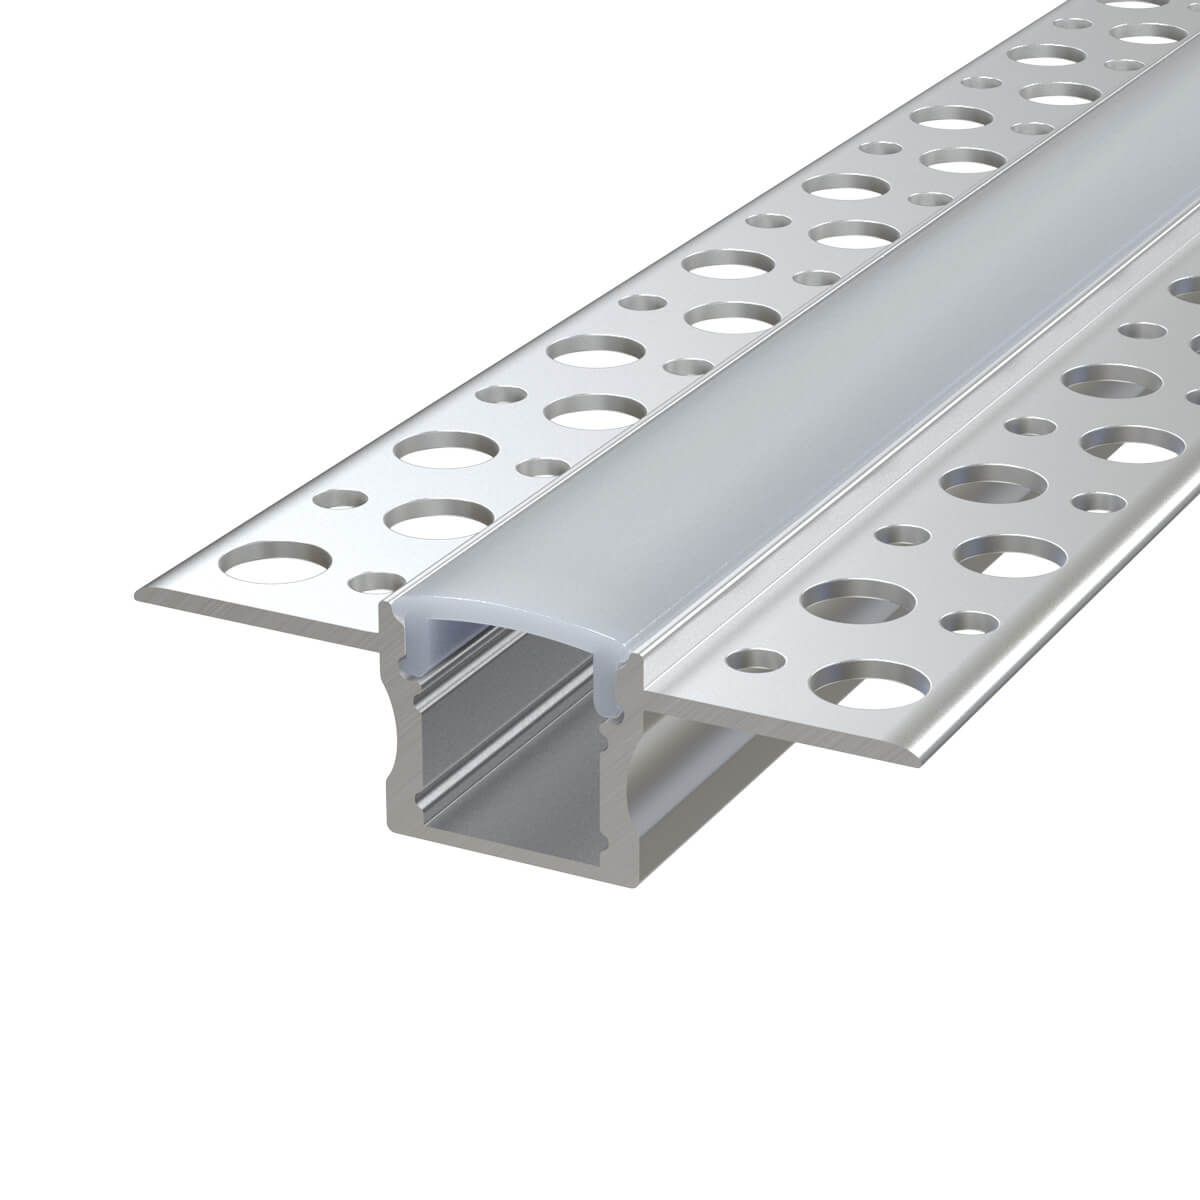 View Trimless Plaster In Aluminium Profile With Diffuser End Caps 2m Long information